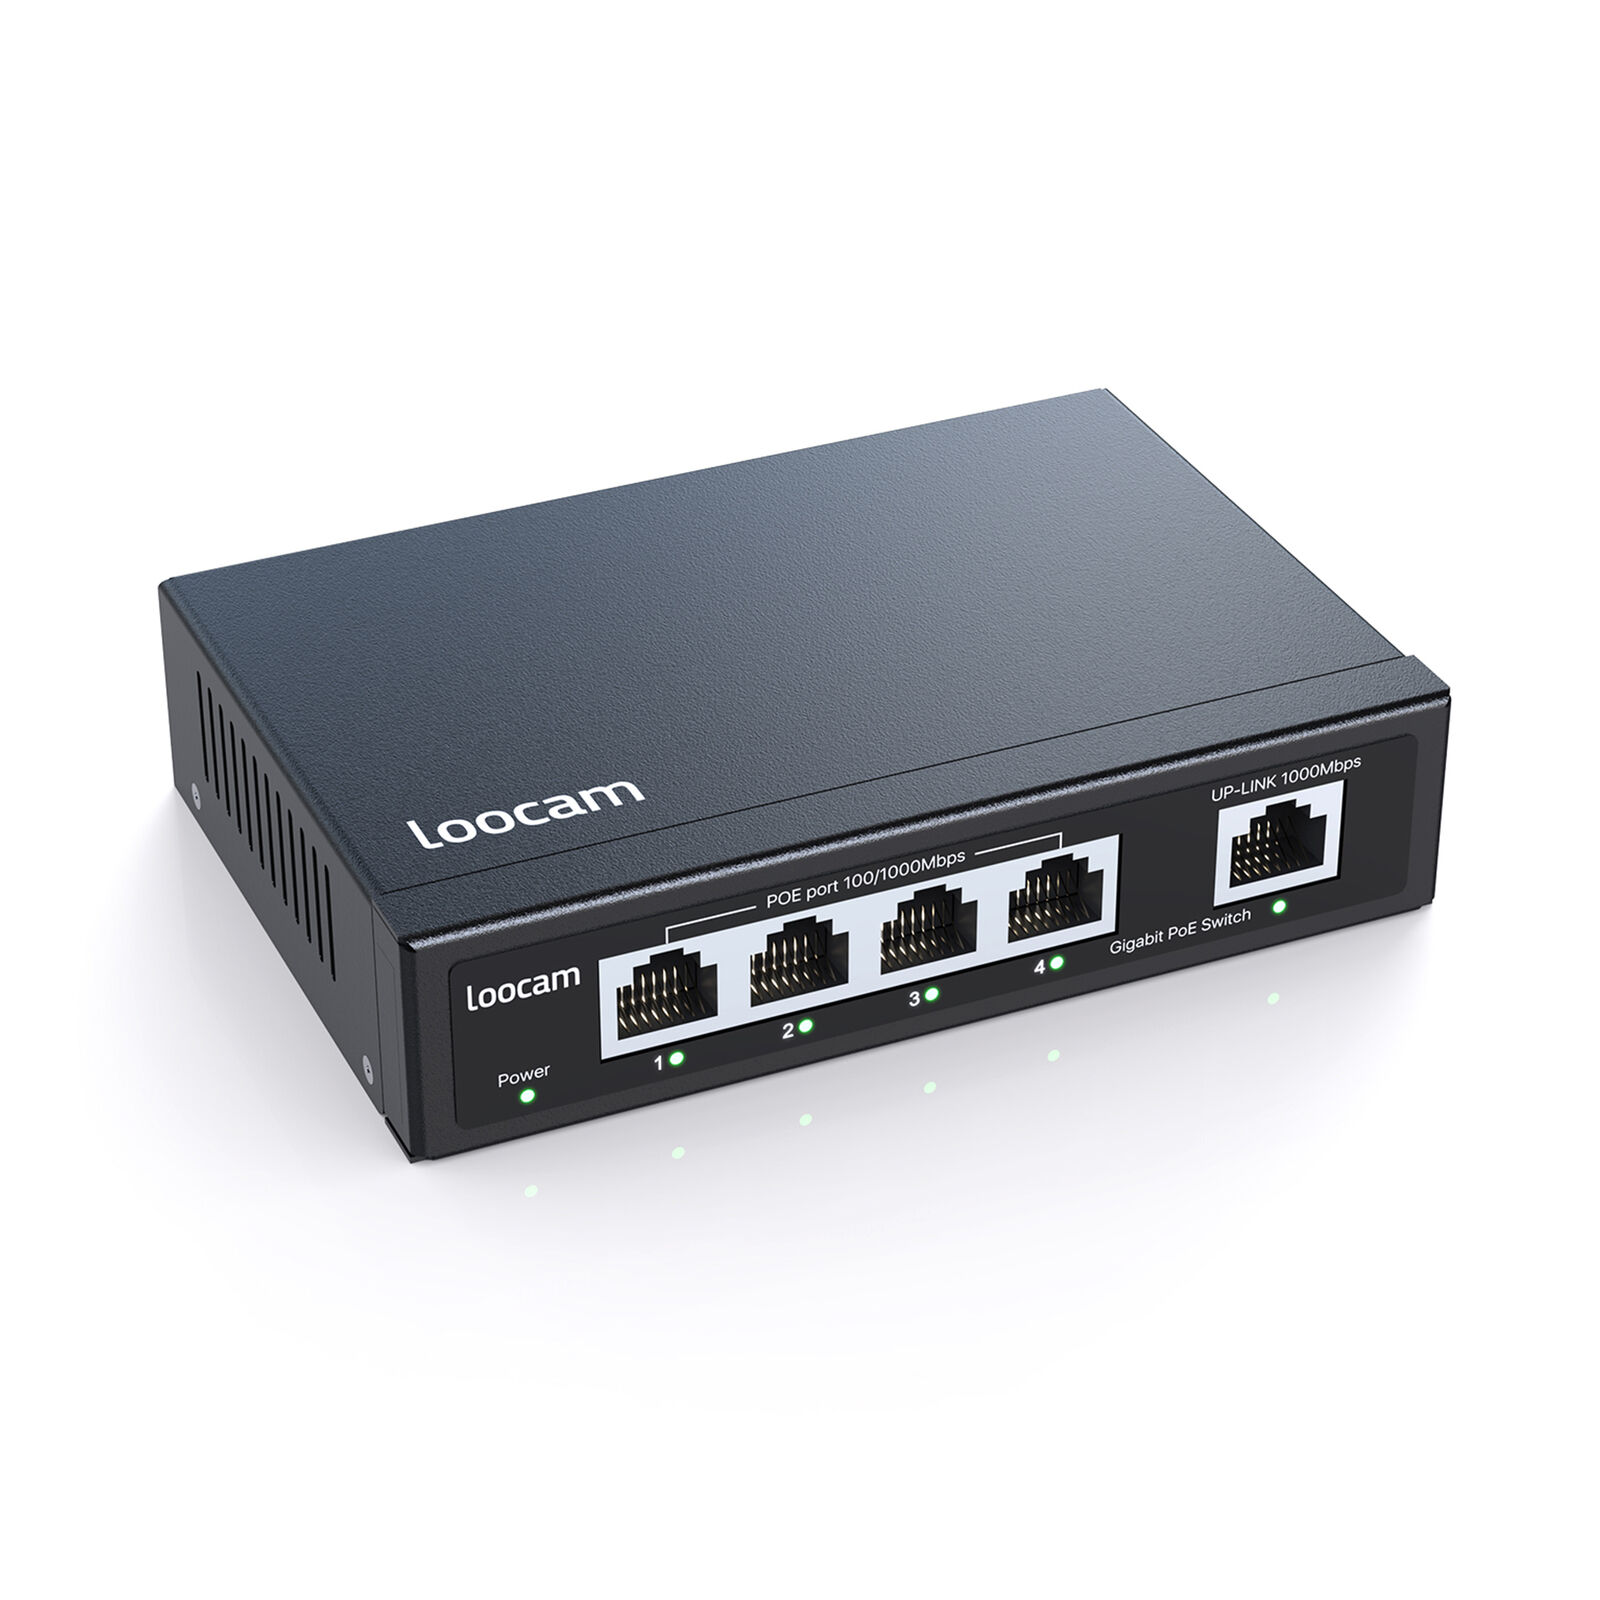 Loocam Gigabit PoE Switch 4 Port 65W Unmanaged Ethernet Switch Plug and Play